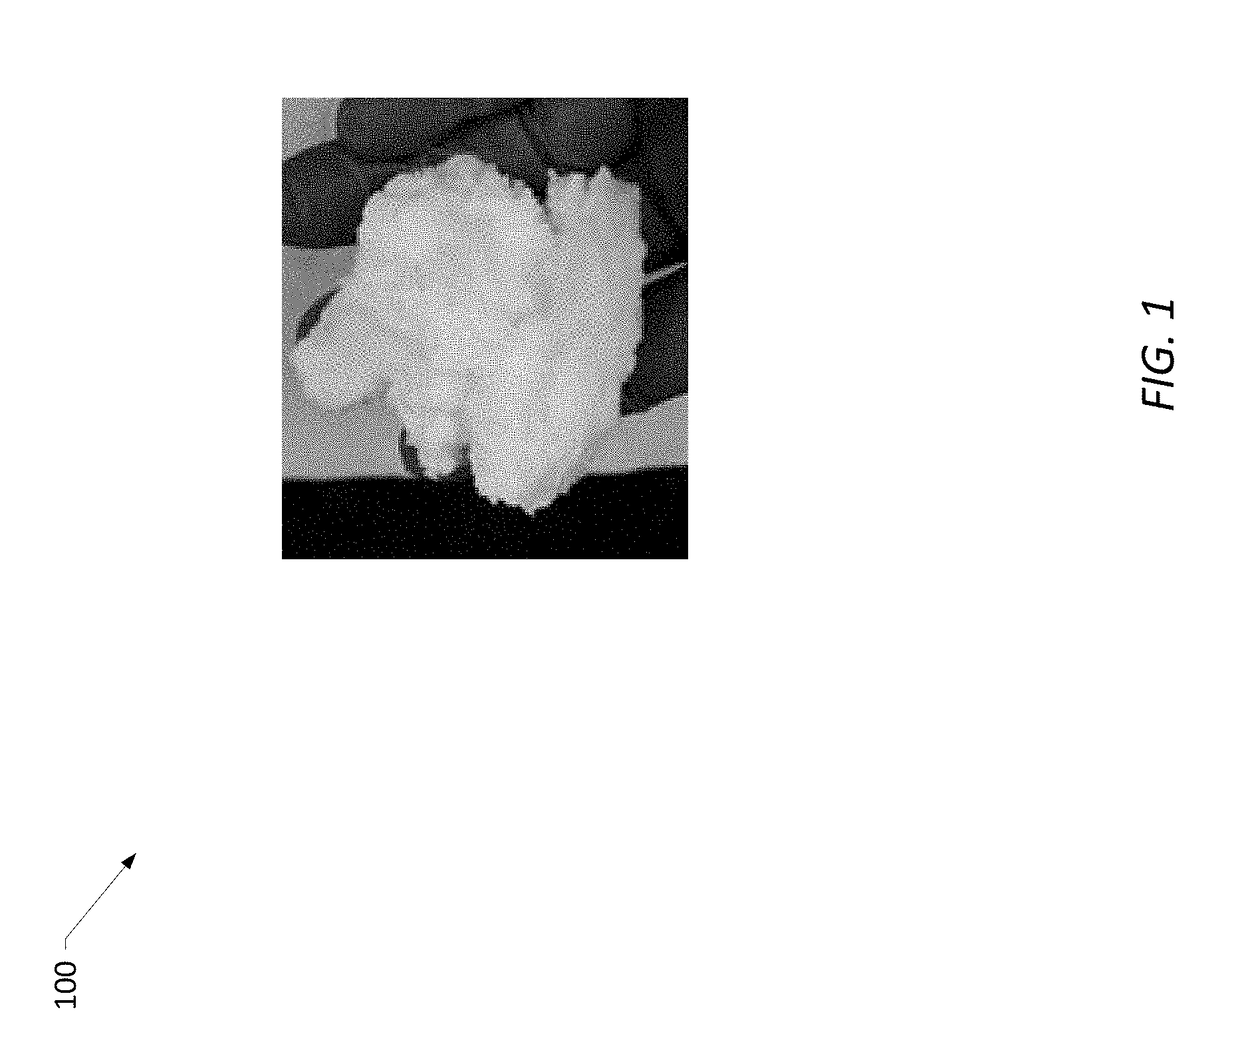 Loss Circulation Material Composition Having an Acidic Nanoparticle Based Dispersion and Polyamine